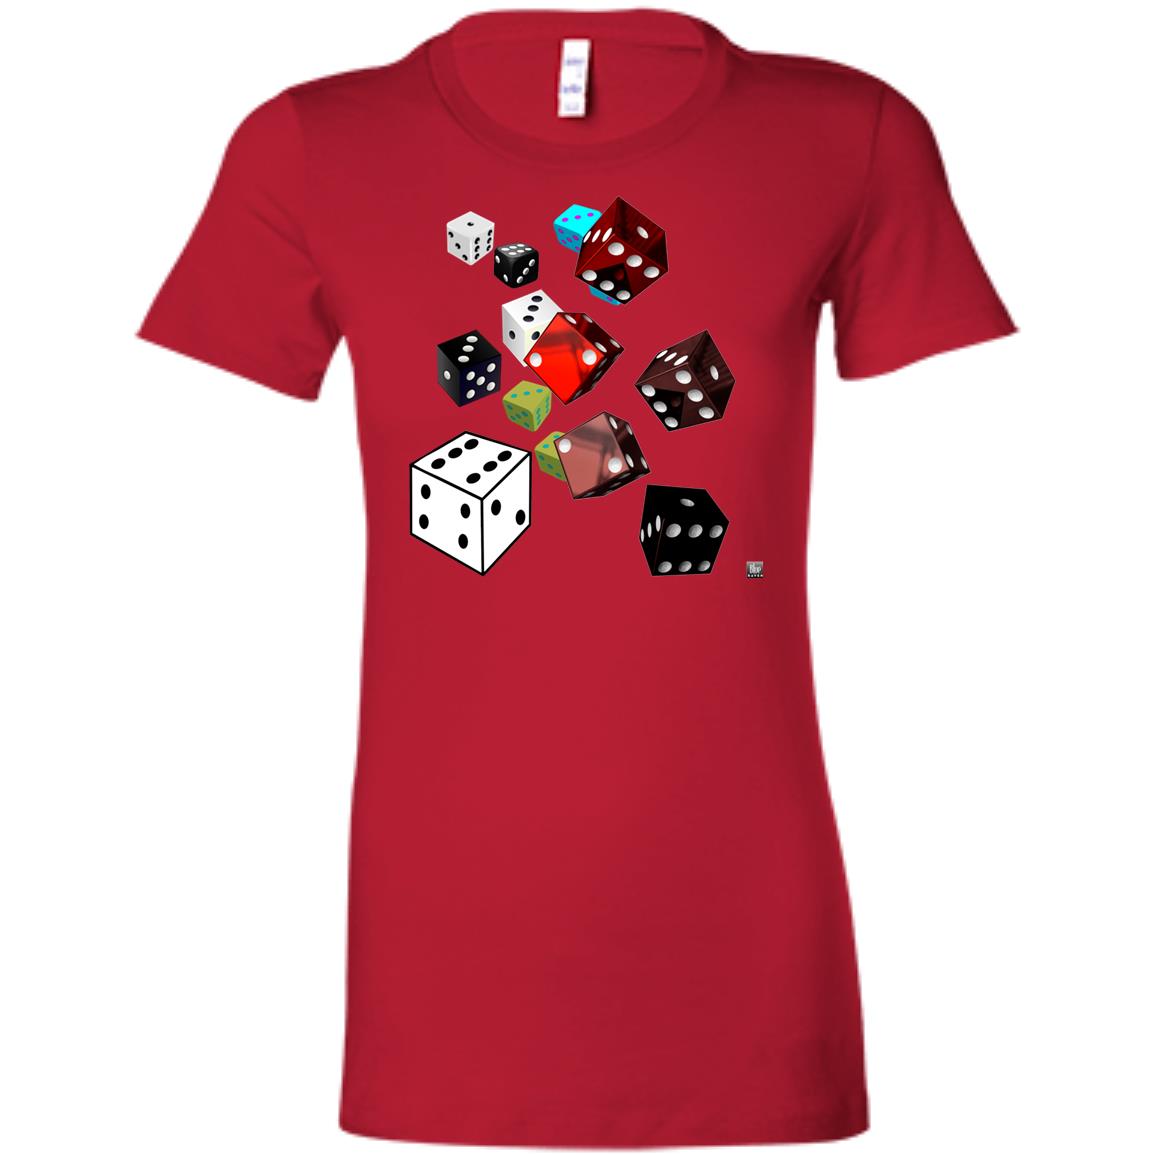 roll of the dice - Women's Fitted T-Shirt